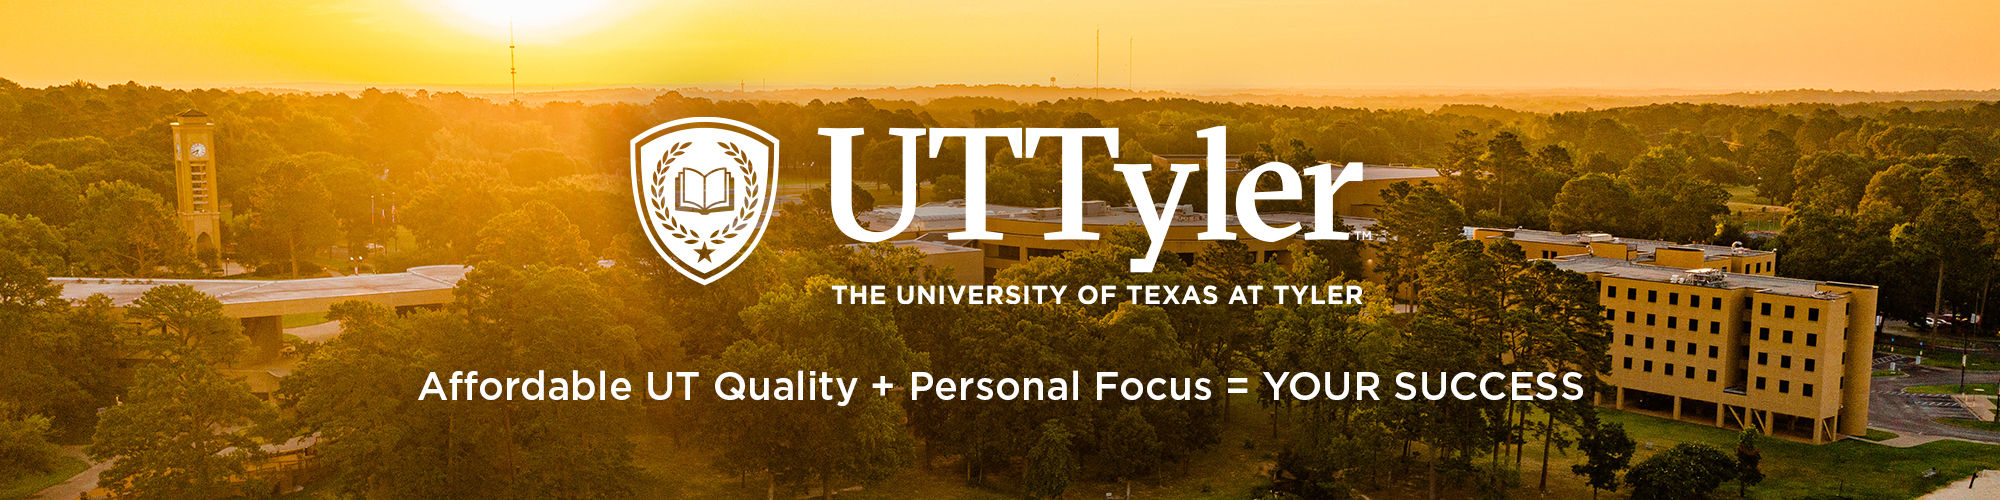 The University of Texas at Tyler - Your Success. Our Passion.